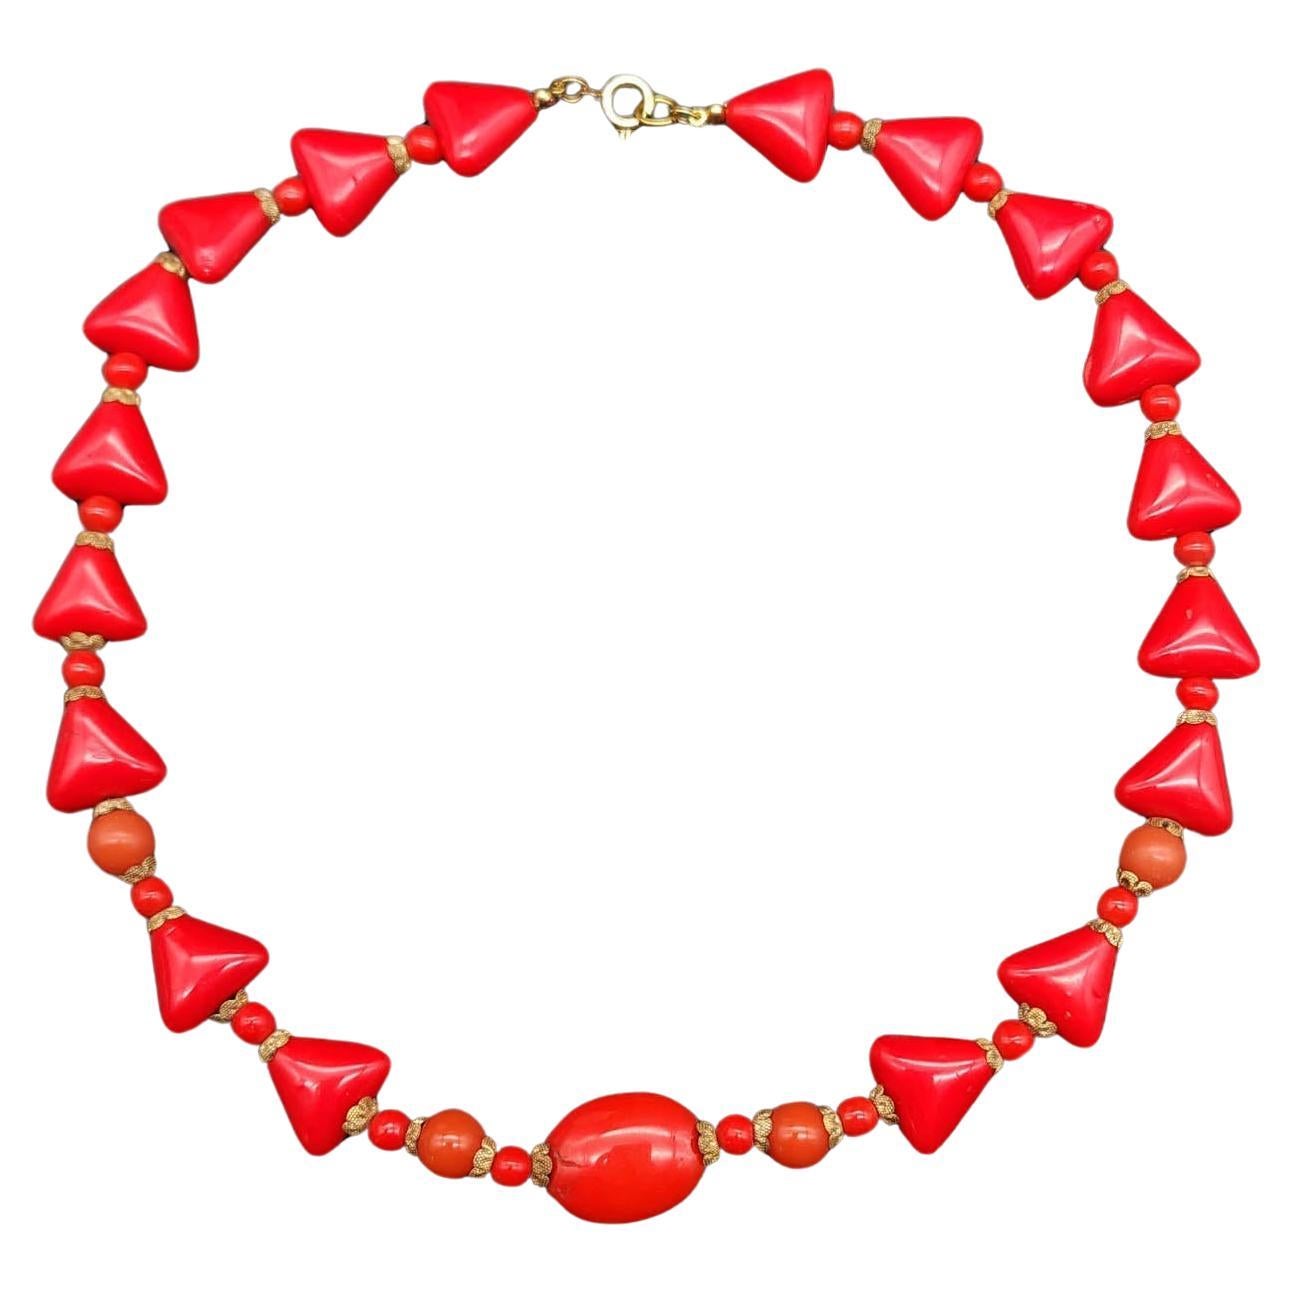 Chic Red Lucite Bead Necklace, Triangle & Round Beads Gold-Filled Clasp, Vintage